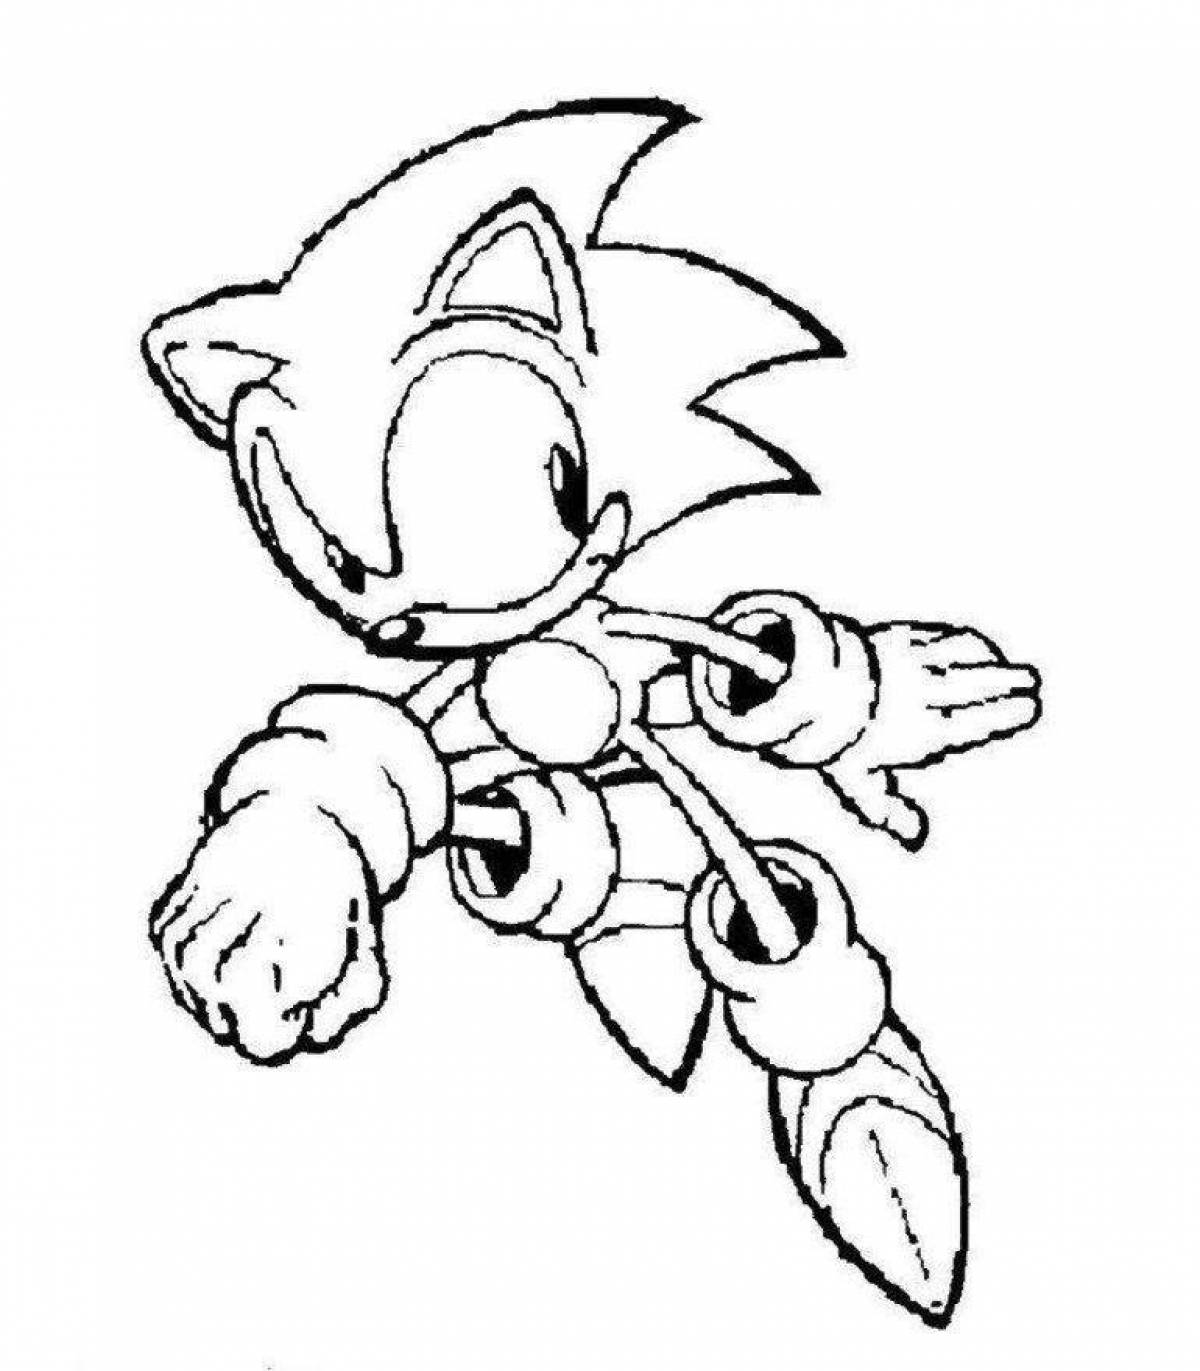 Sonic 2 amazing coloring book